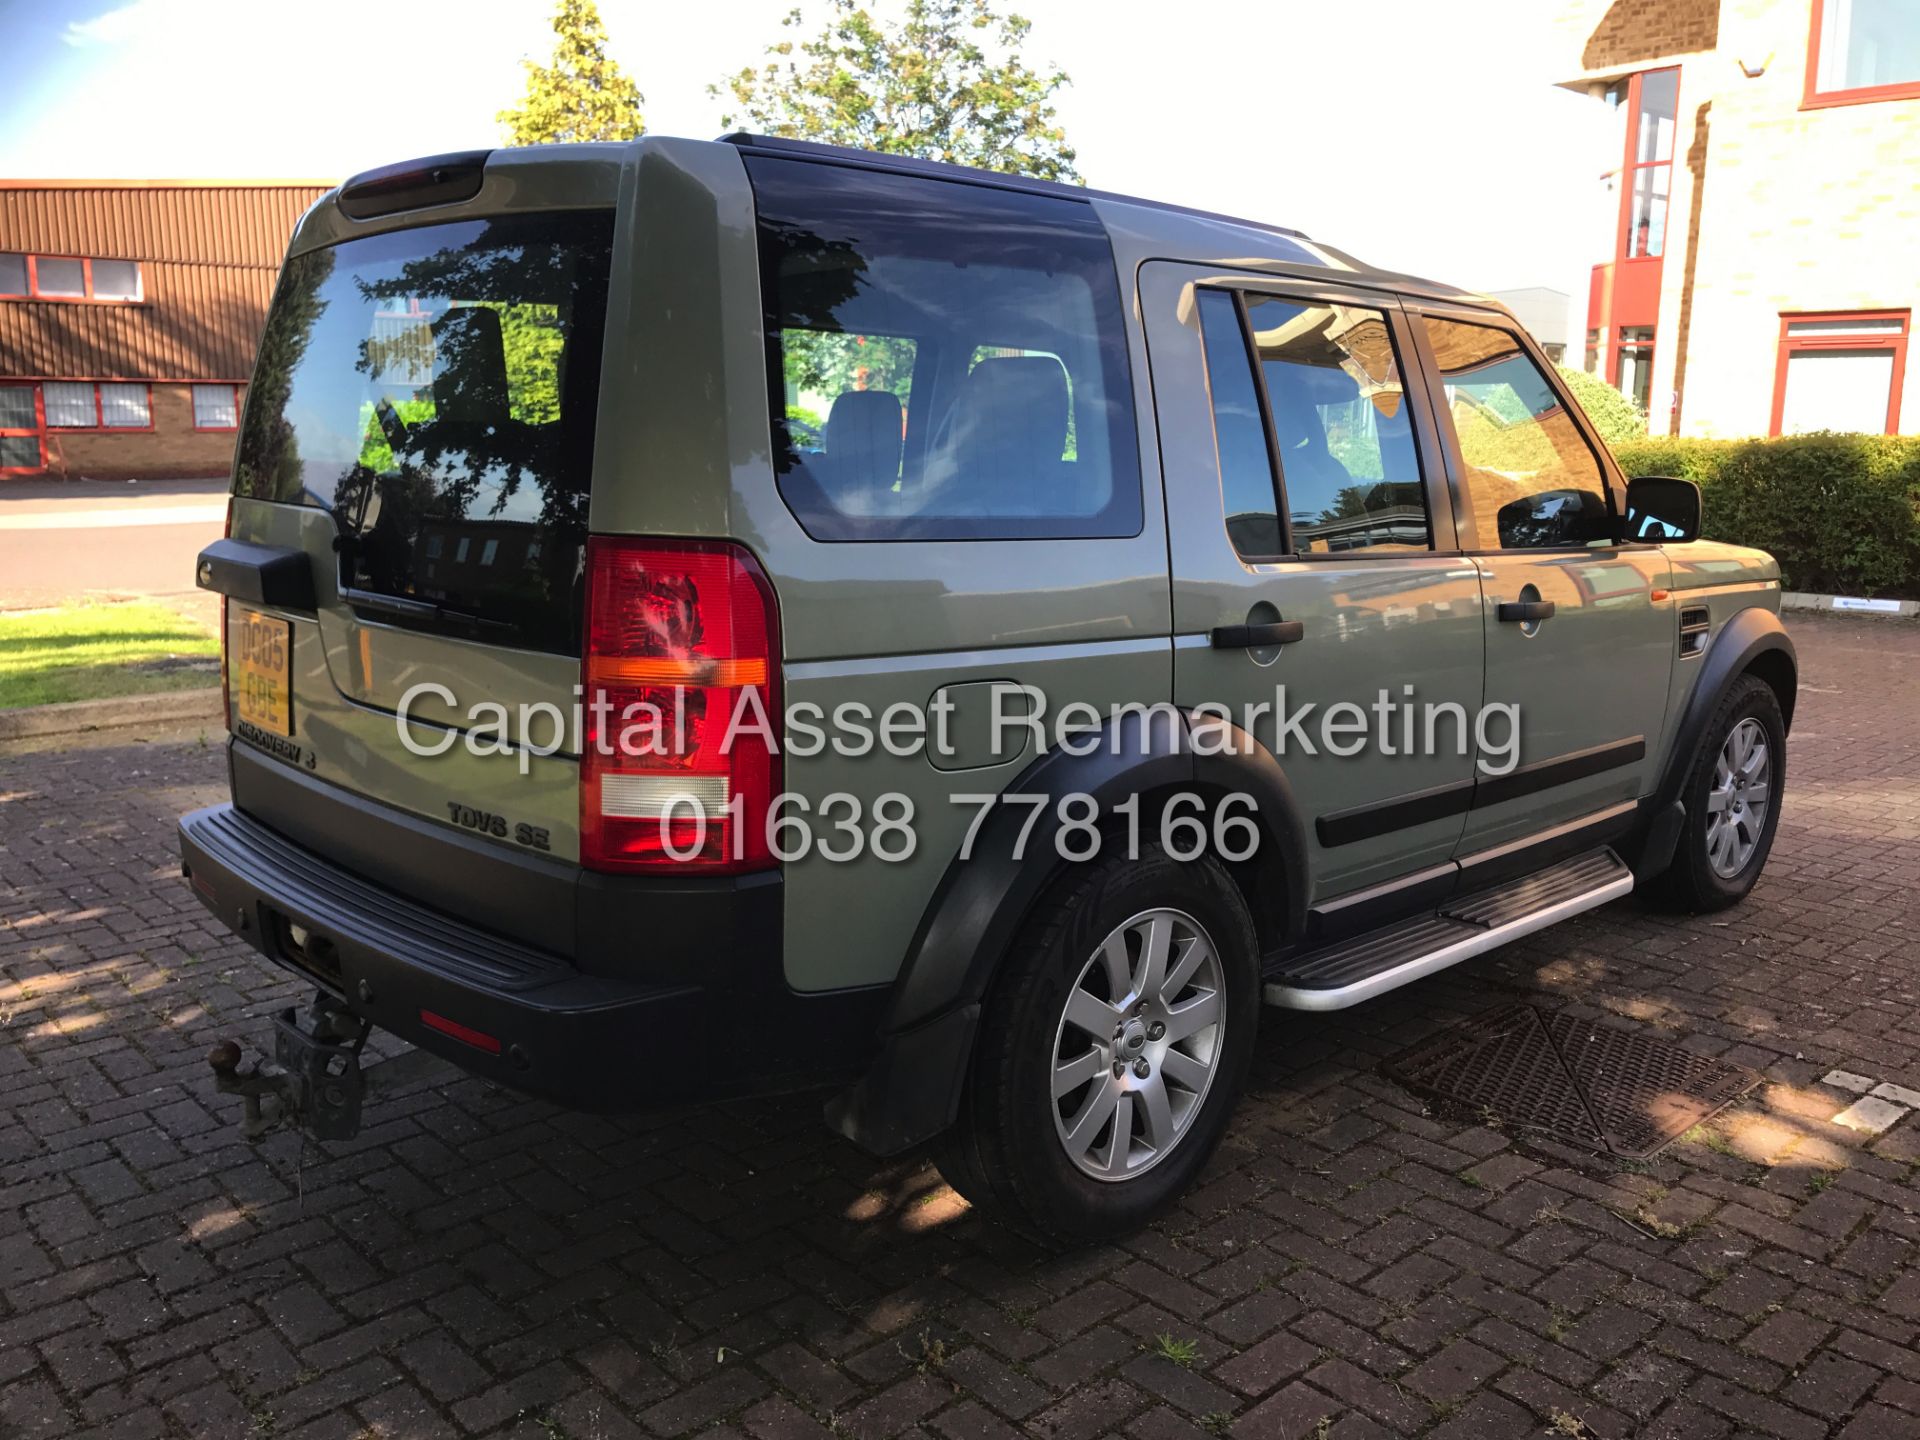 (ON SALE) LAND ROVER DISCOVERY TDV6 "SE 7 SEATER" GREAT SPEC - SAT NAV - FULL LEATHER - NO VAT - Image 9 of 28